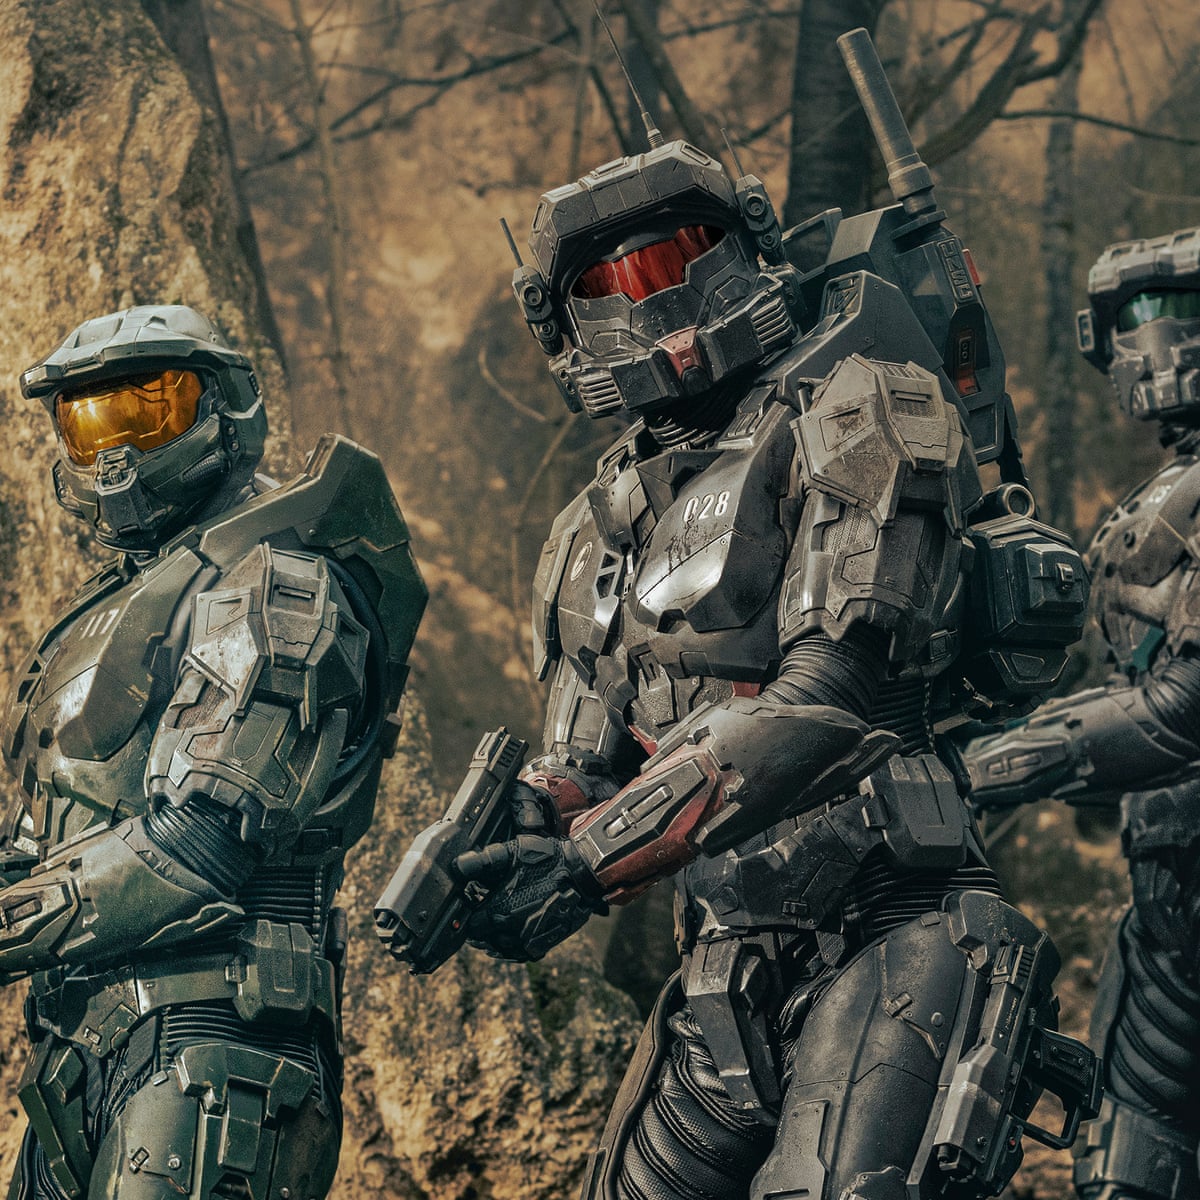 The Halo TV Series Is Going To Show More Of Master Chief Than Ever Before